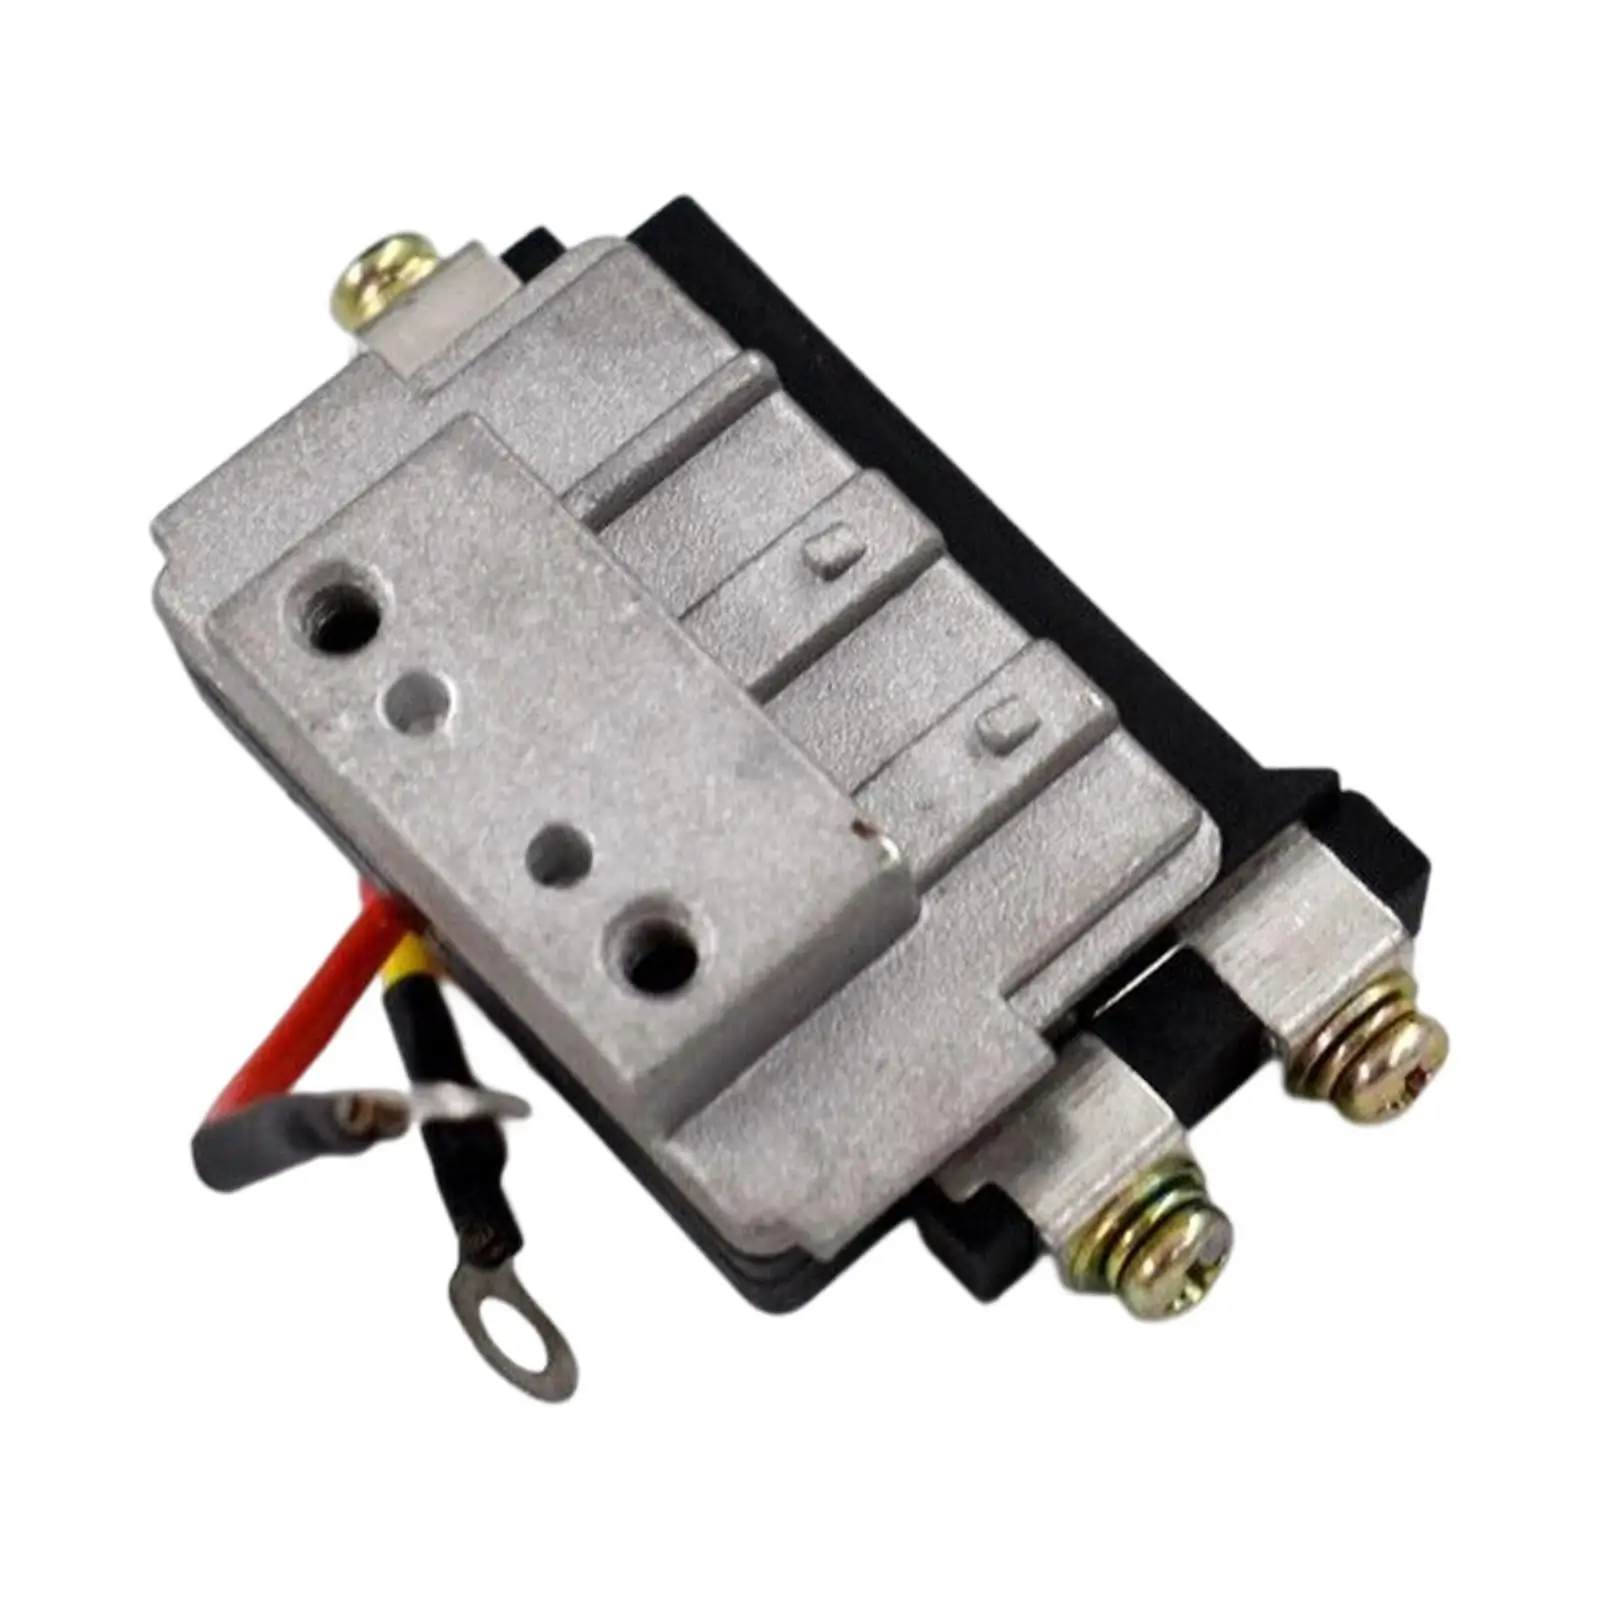 89620-12440 Ignition Module Direct Replaces Accessory Easy to Install Professional